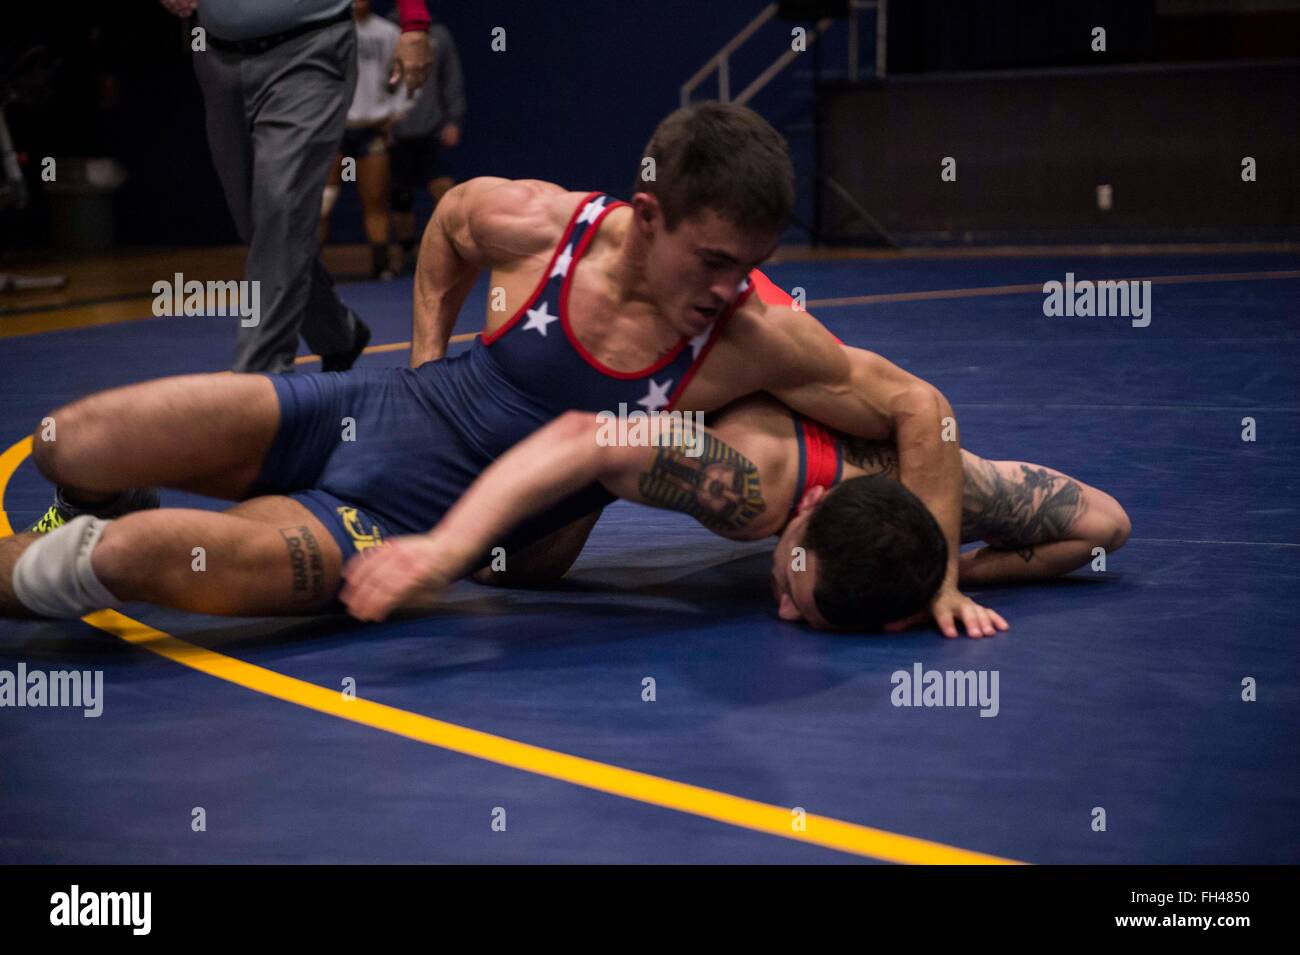 BREMERTON, Wash. (Feb 21, 2016) - Fireman Ryan Schmehr, a San Diego native stationed with USS Ronald Reagan (CVN 76), scrambles for position against Air Force Airman 1st Class Joey Garza in a 57kg Freestyle wrestling match during the 2016 Armed Forces Championship at Naval Base Kitsap-Bremerton. The tournament is held over two days, one for Greco-Roman style wrestling and the other Freestyle, between the Army, Navy, Marine Corps and Air Force. Stock Photo